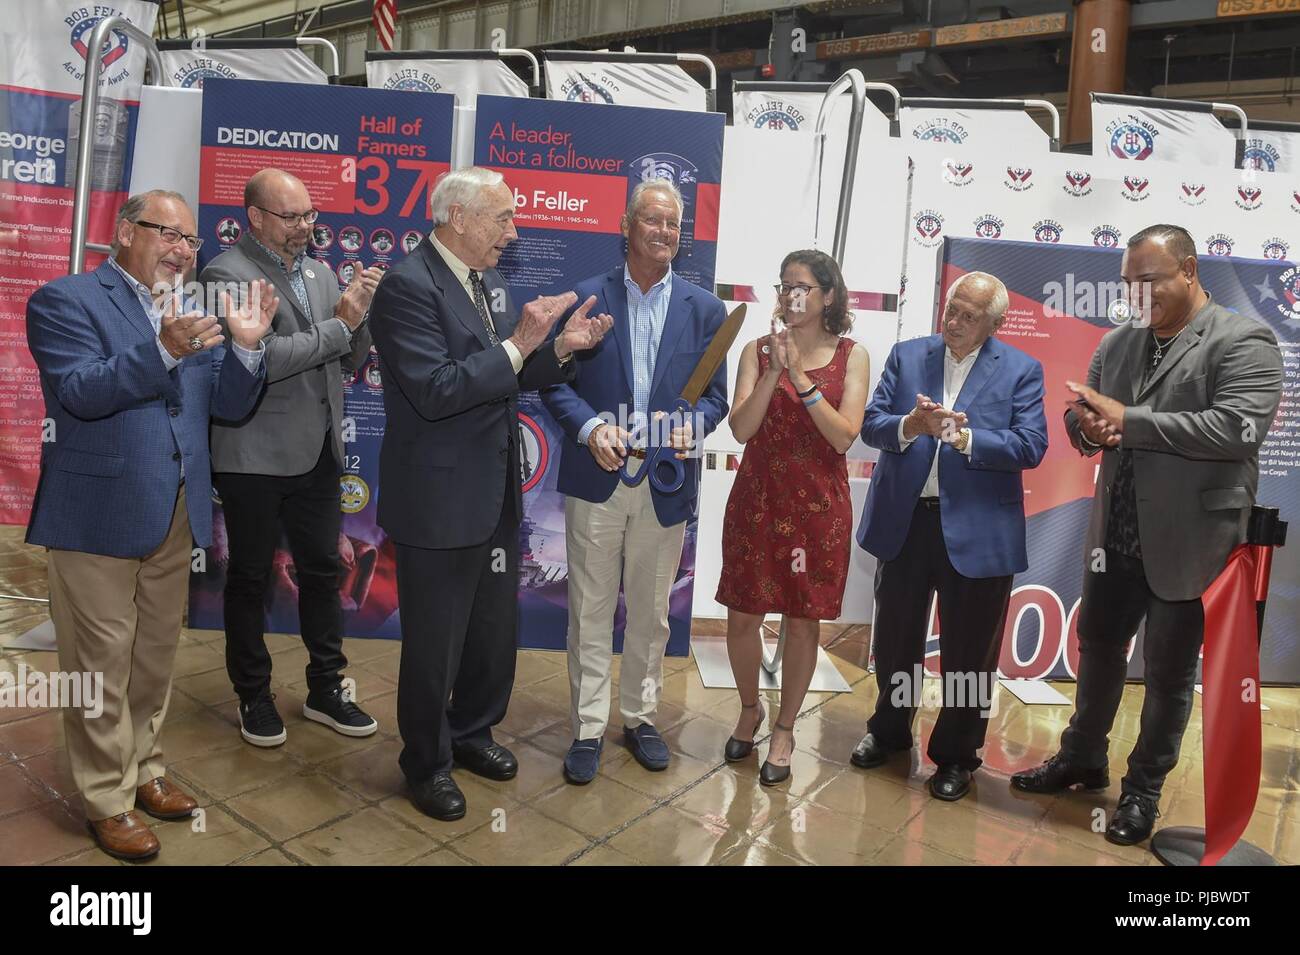 (July 16, 2018) George Brett, National Baseball Hall of Famer, center, former Secretary of the Navy, the Honorable John H. Dalton, left, and members of the Bob Feller Act of Valor Foundation, cut a ribbon during a ceremony for the Bob Feller Act of Valor Foundation's launch of its traveling educational exhibit at the National Museum of the United States Navy (NMUSN). The traveling exhibit is displayed in the NMUSN and is alongside the museum's recently opened exhibit, 'Playball - Navy and the National Pastime,' which highlights the history of baseball and the U.S. Navy. Stock Photo